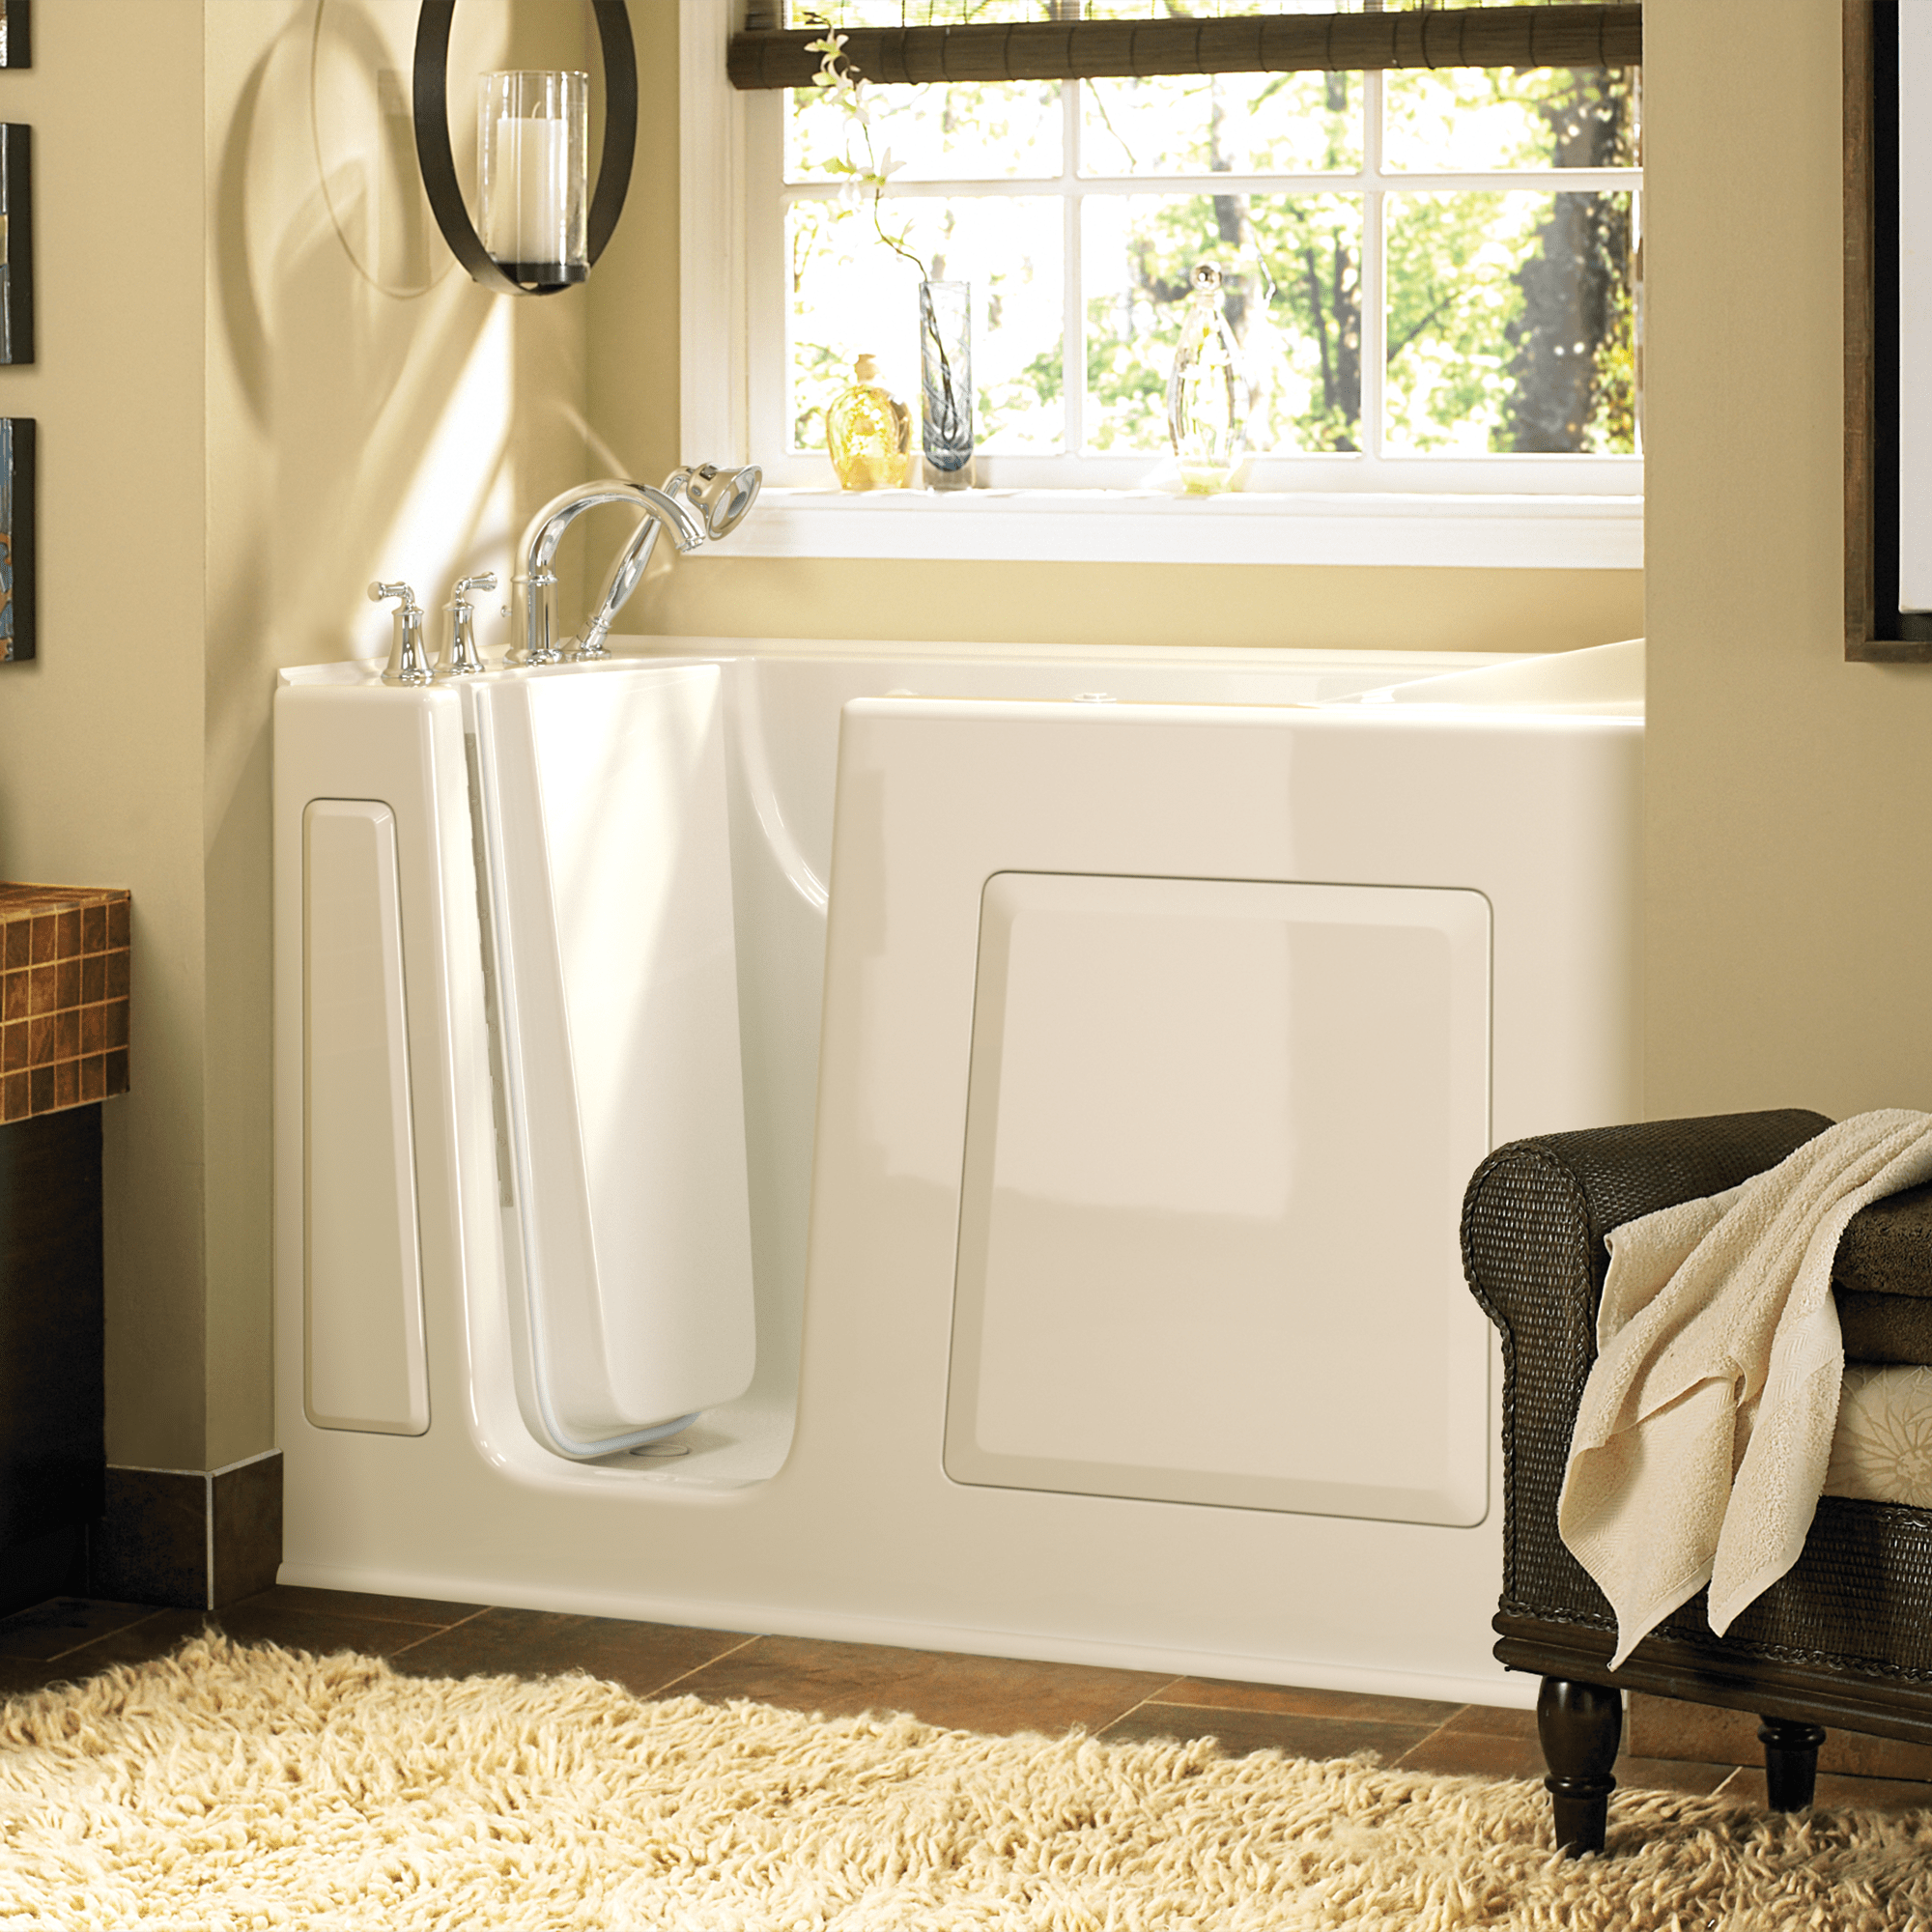 Gelcoat Value Series 30x60 Inch Walk-In Bathtub with Whirlpool Massage System - Left Hand Door and Drain